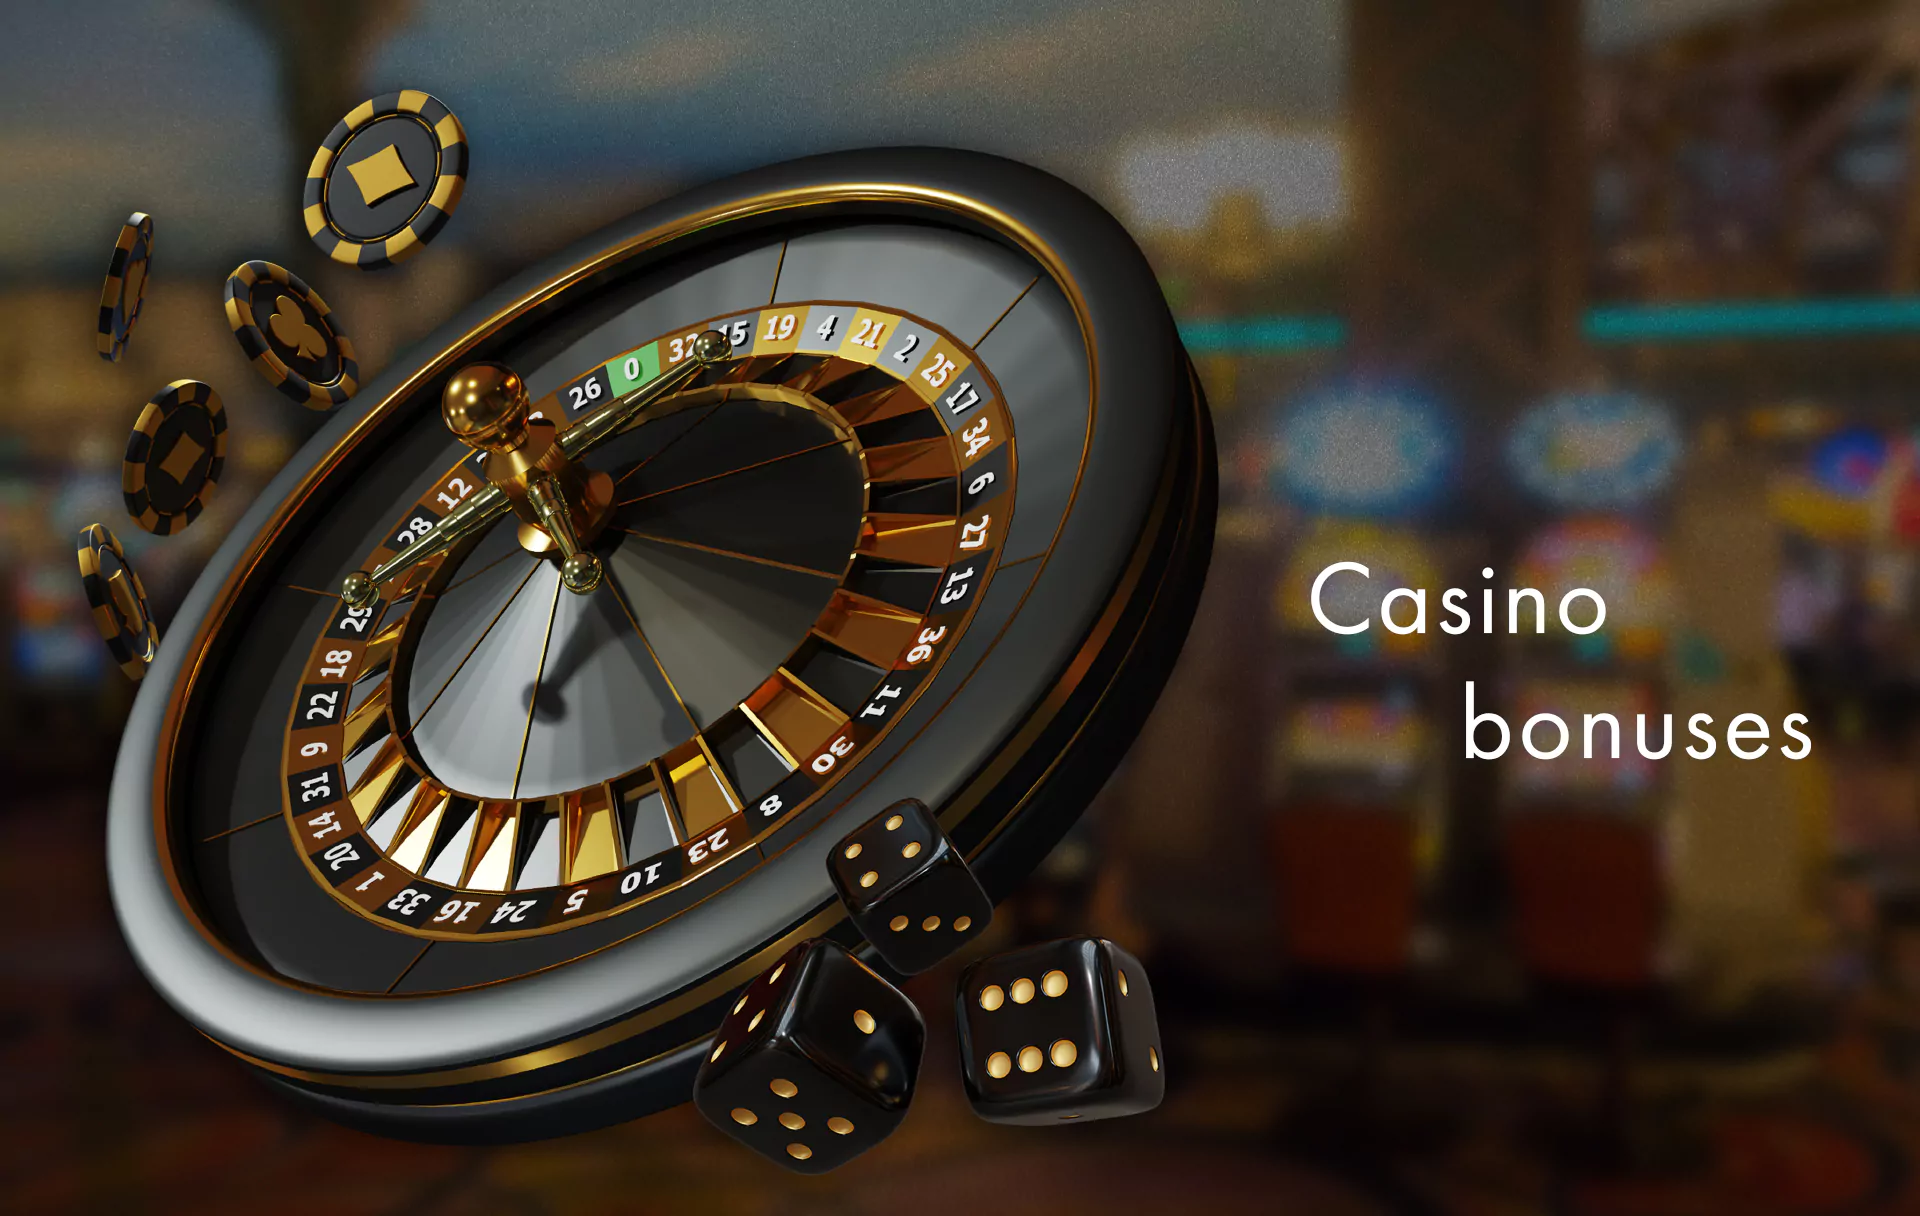 Some of the bonuses you can spend in the casino section.